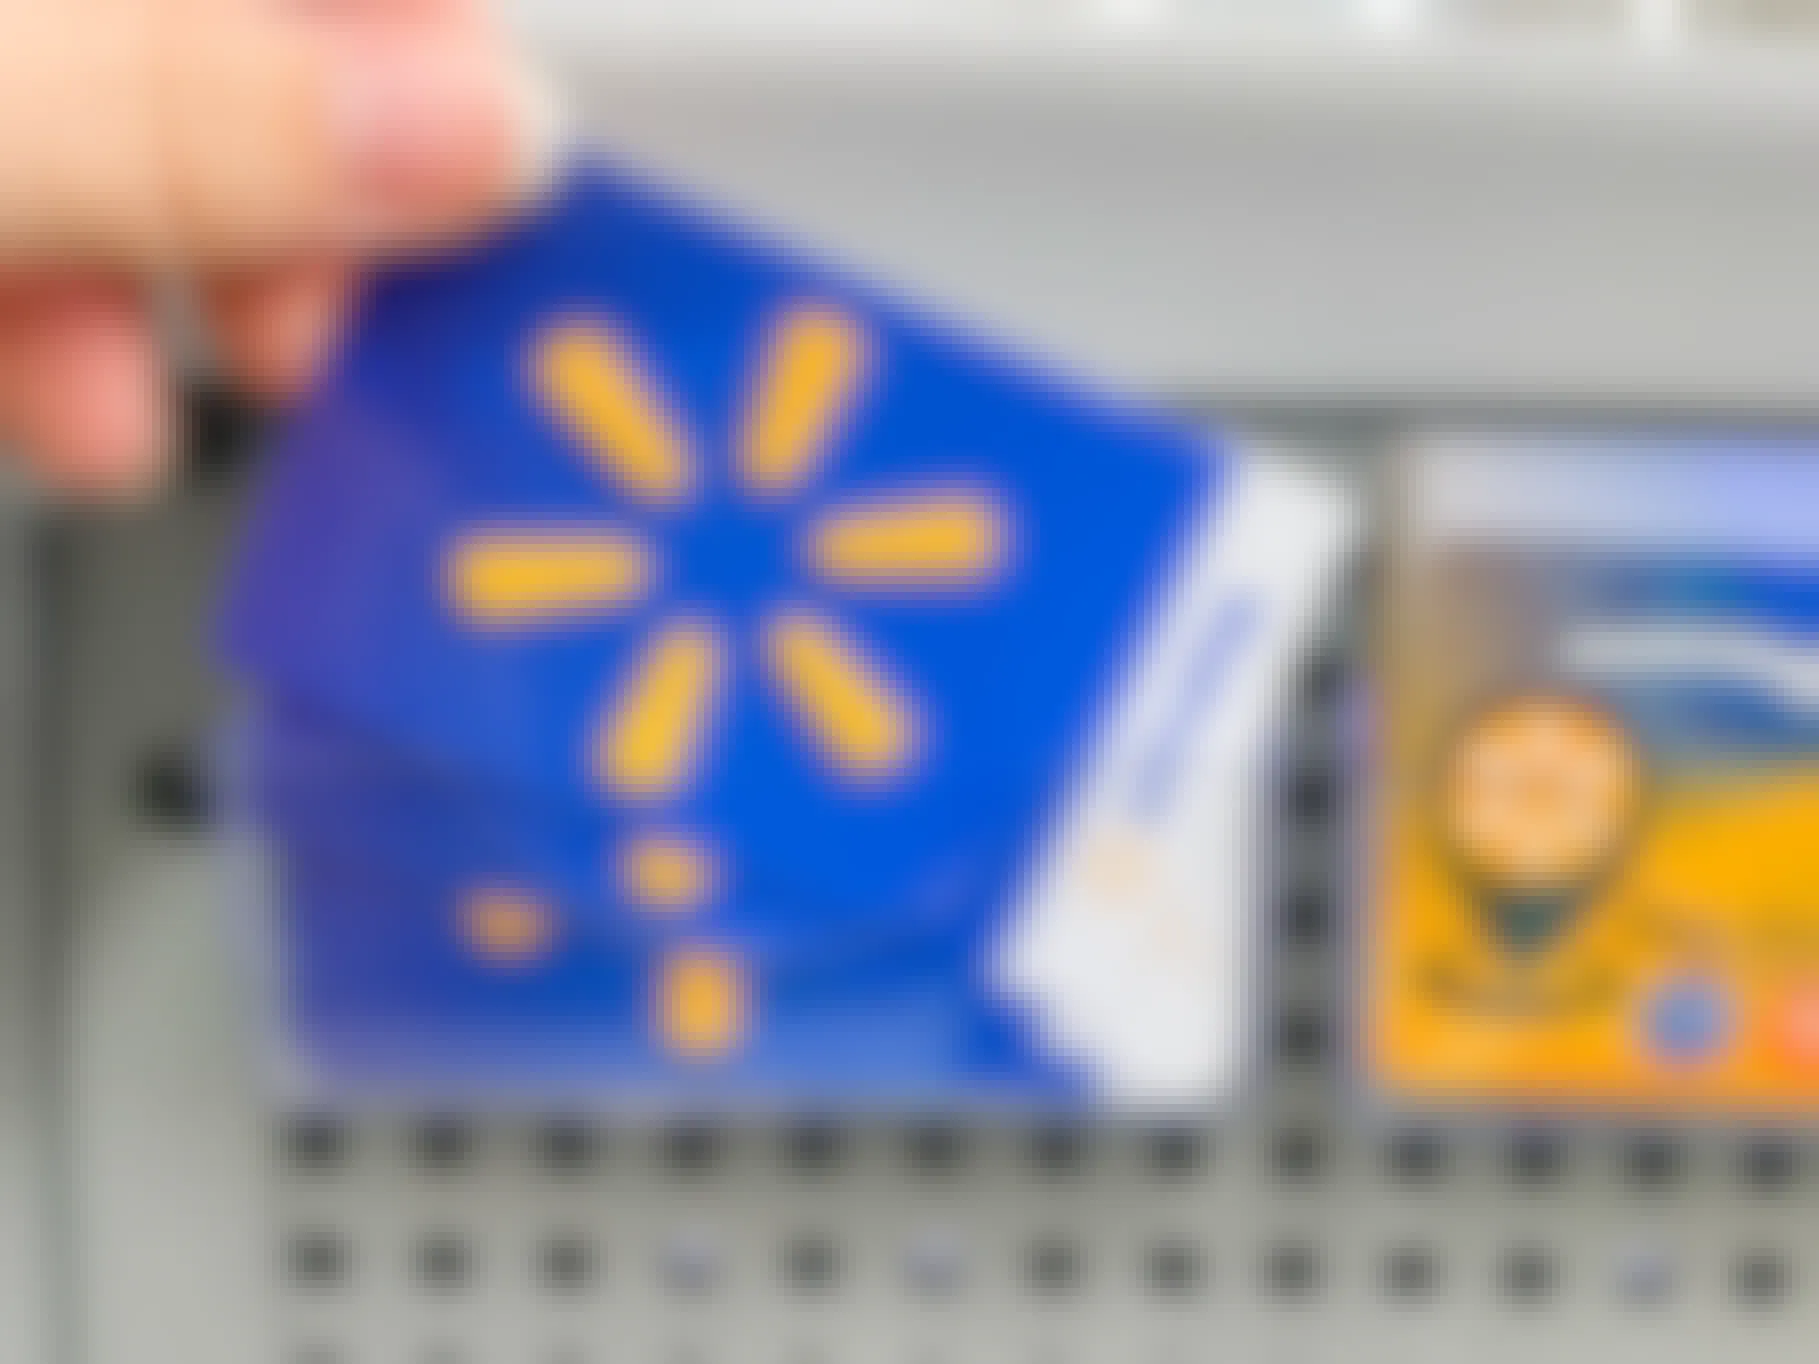 A person's hand taking a Walmart gift card from a display of gift cards at Walmart.